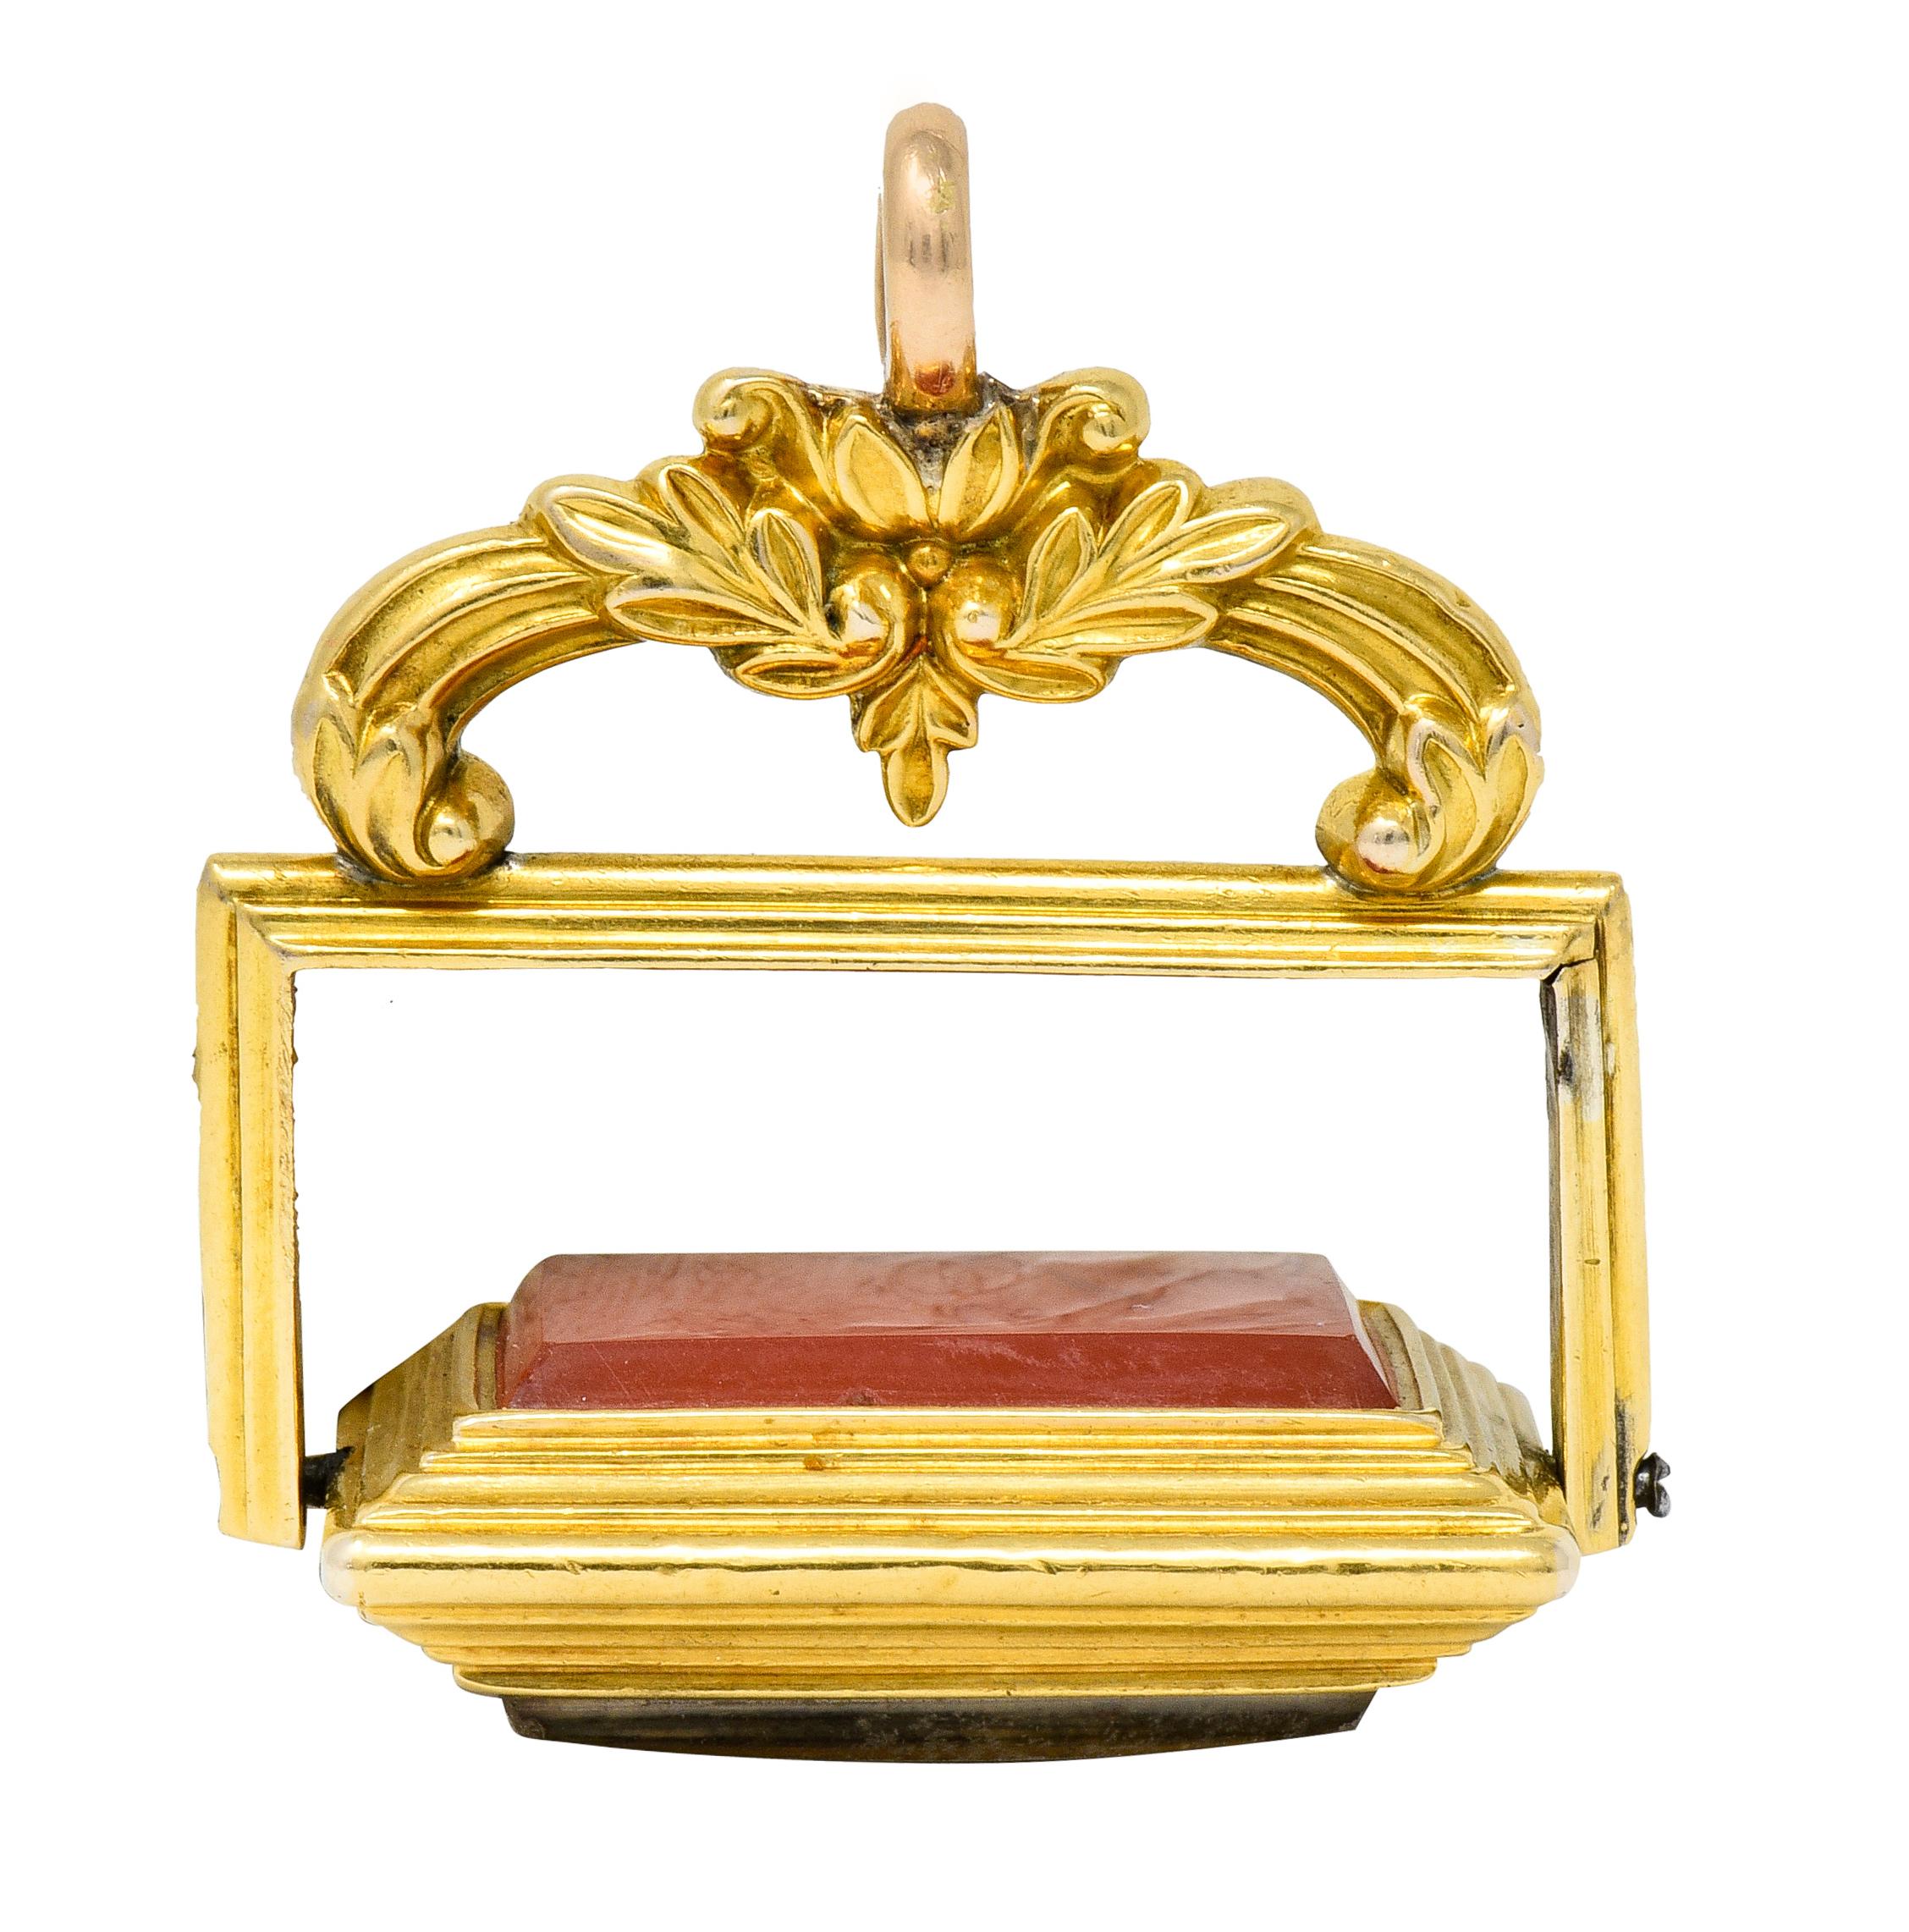 Pendant designed as a whiplash foliate surmount, with loop as bale, terminating as a deeply ridged frame

With a rectangular center that rotates fully around, alternating between carnelian back and still life rendering

Carnelian rectangular tablet